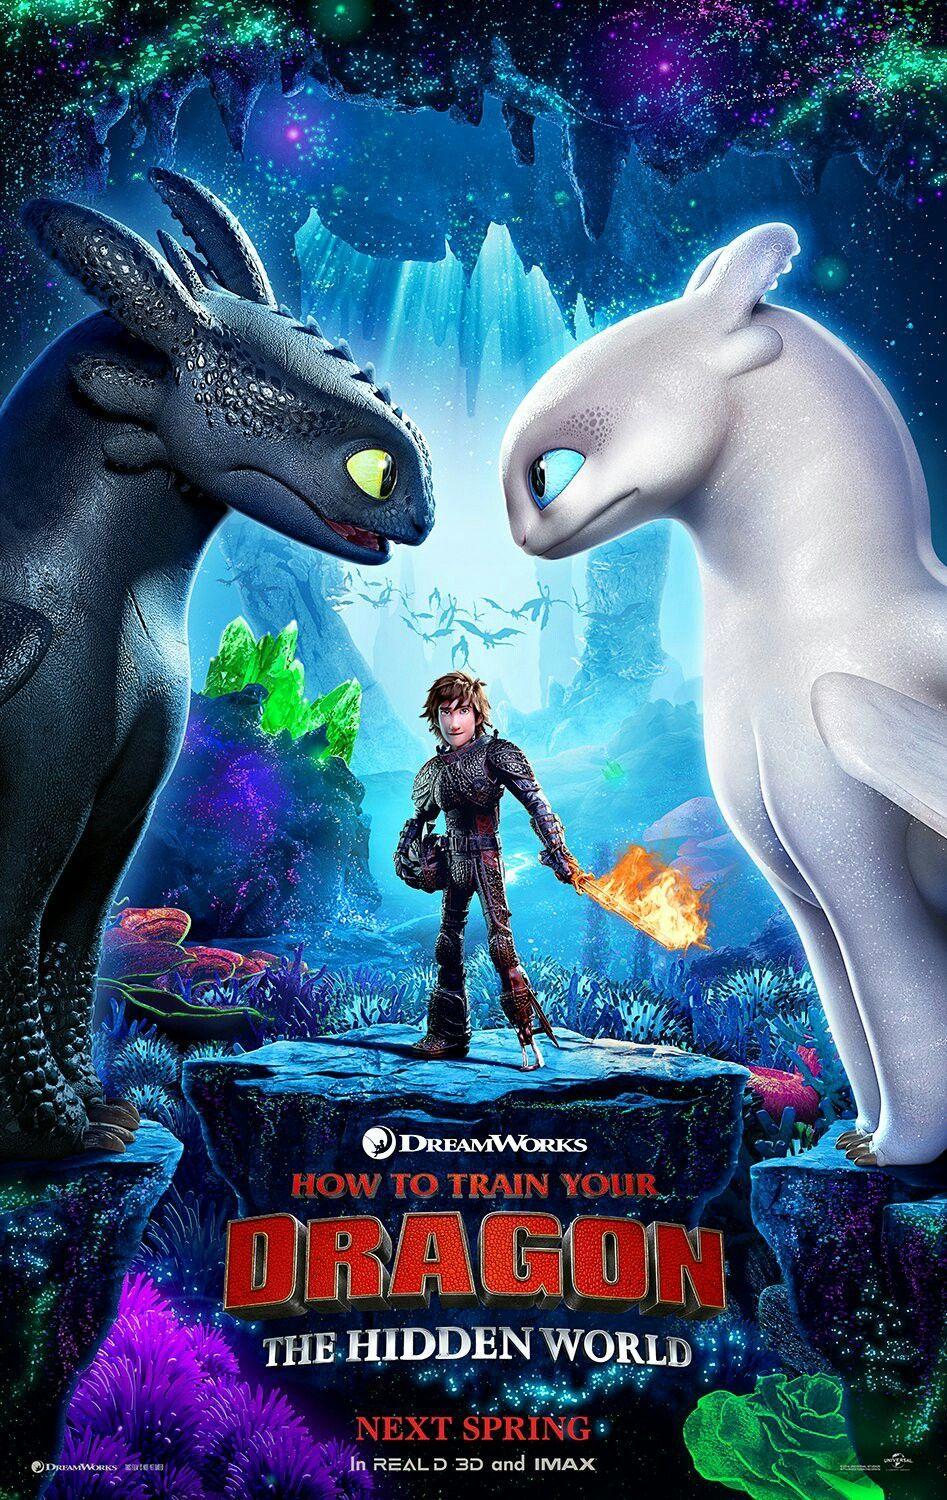 OMGG THE LIGHT FURY AND HICCUP'S FULL ARMOR. Toothless